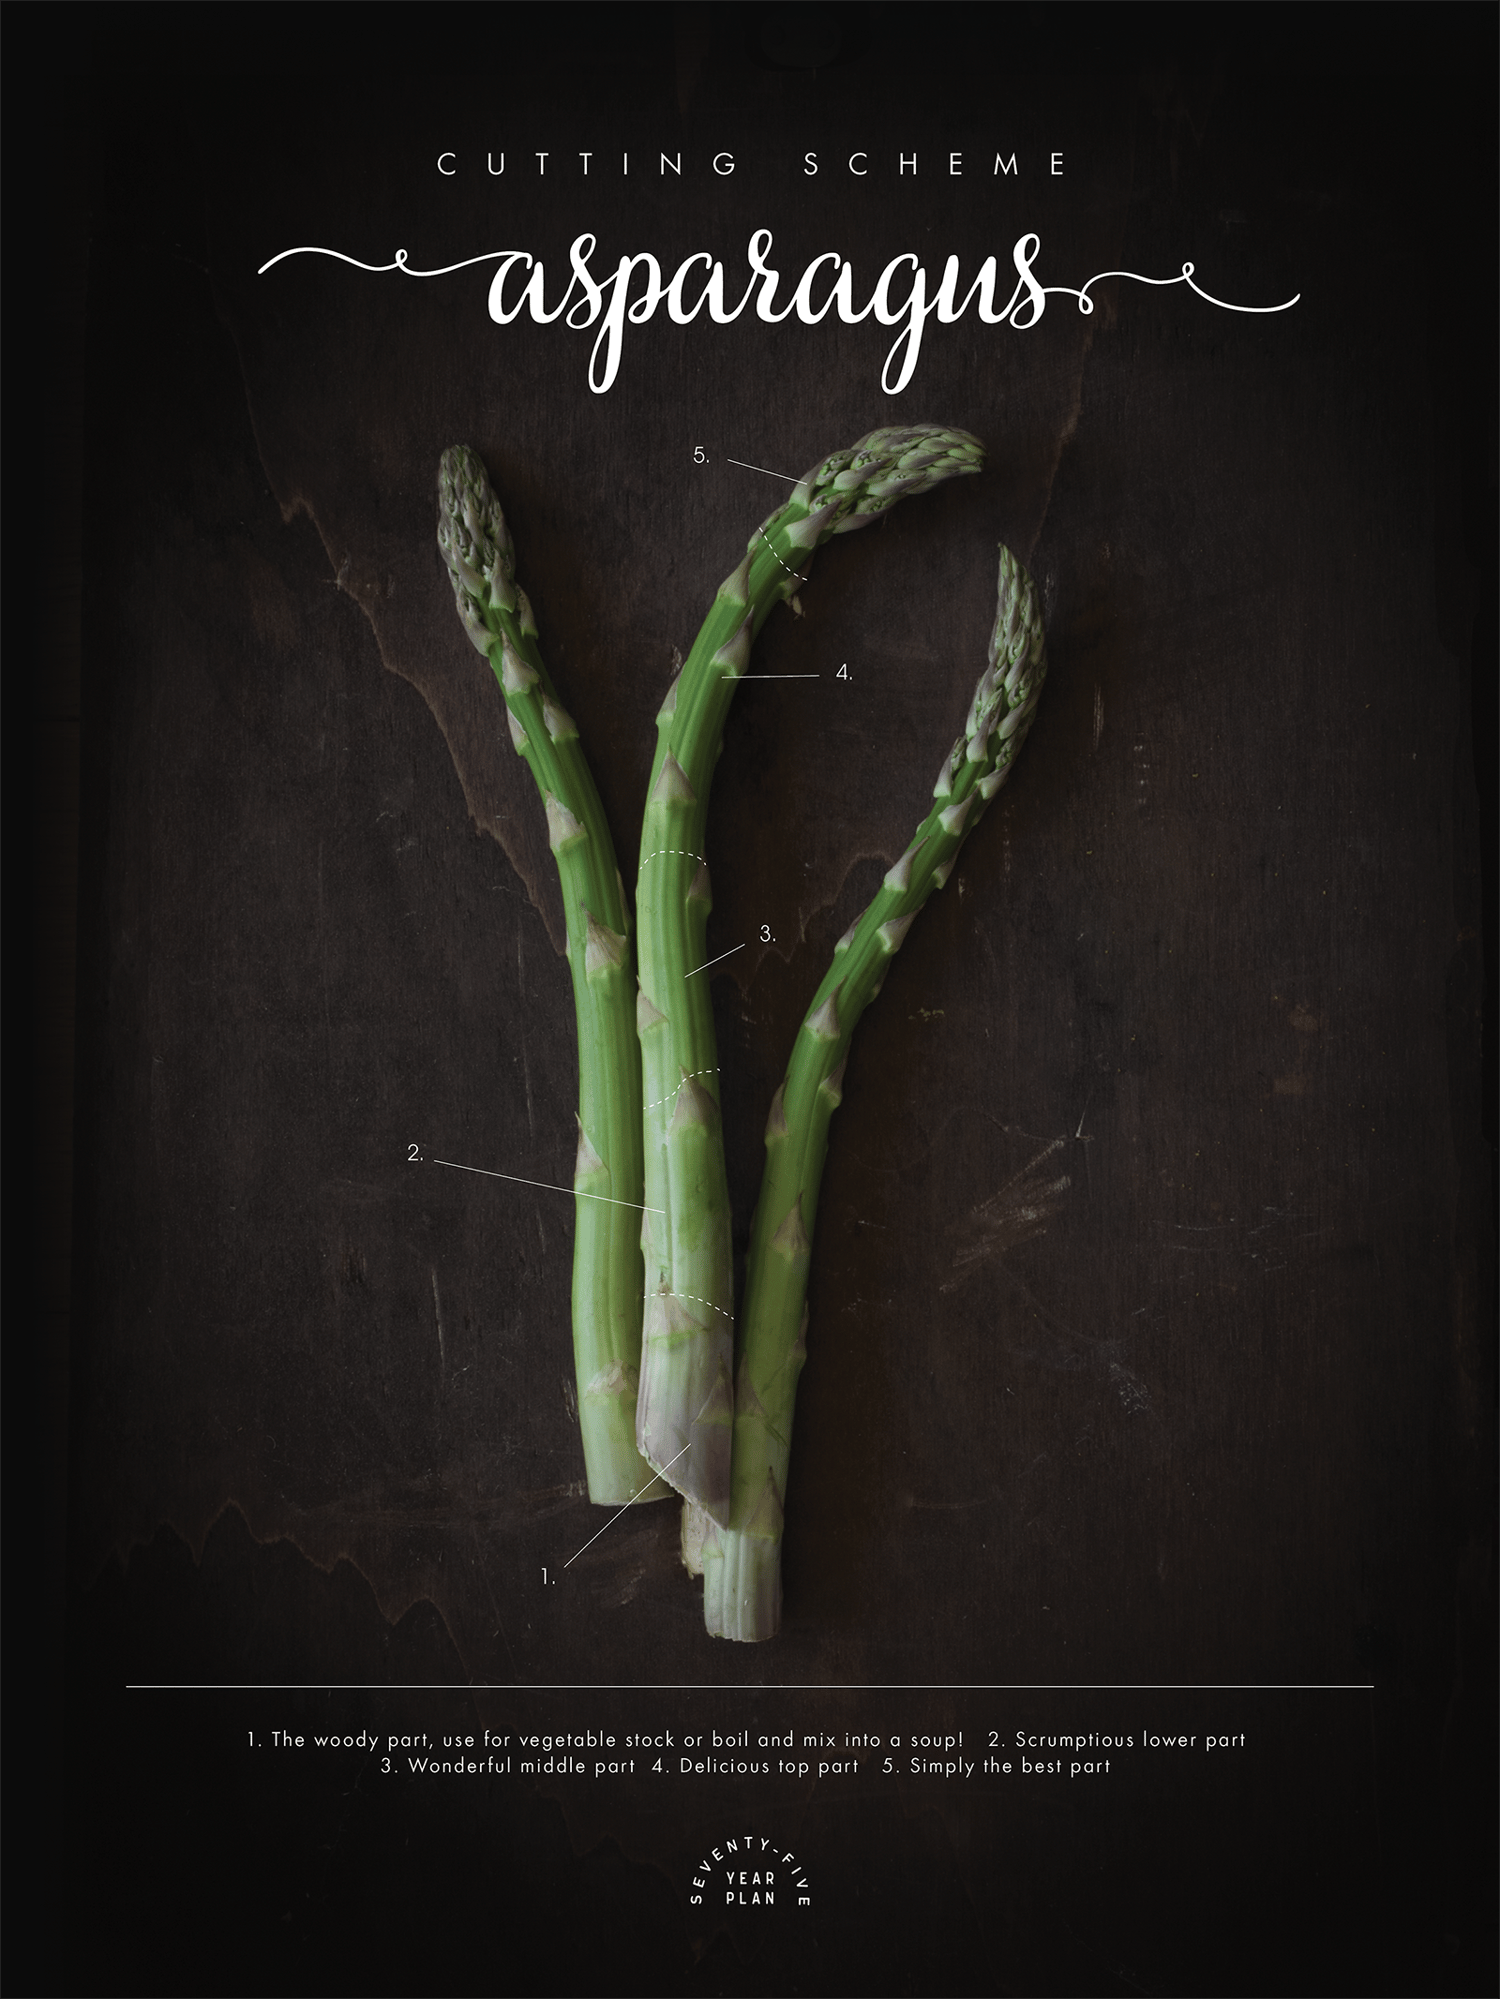 Image of The vegetarian butcher's cutting scheme – Asparagus edition (English version)